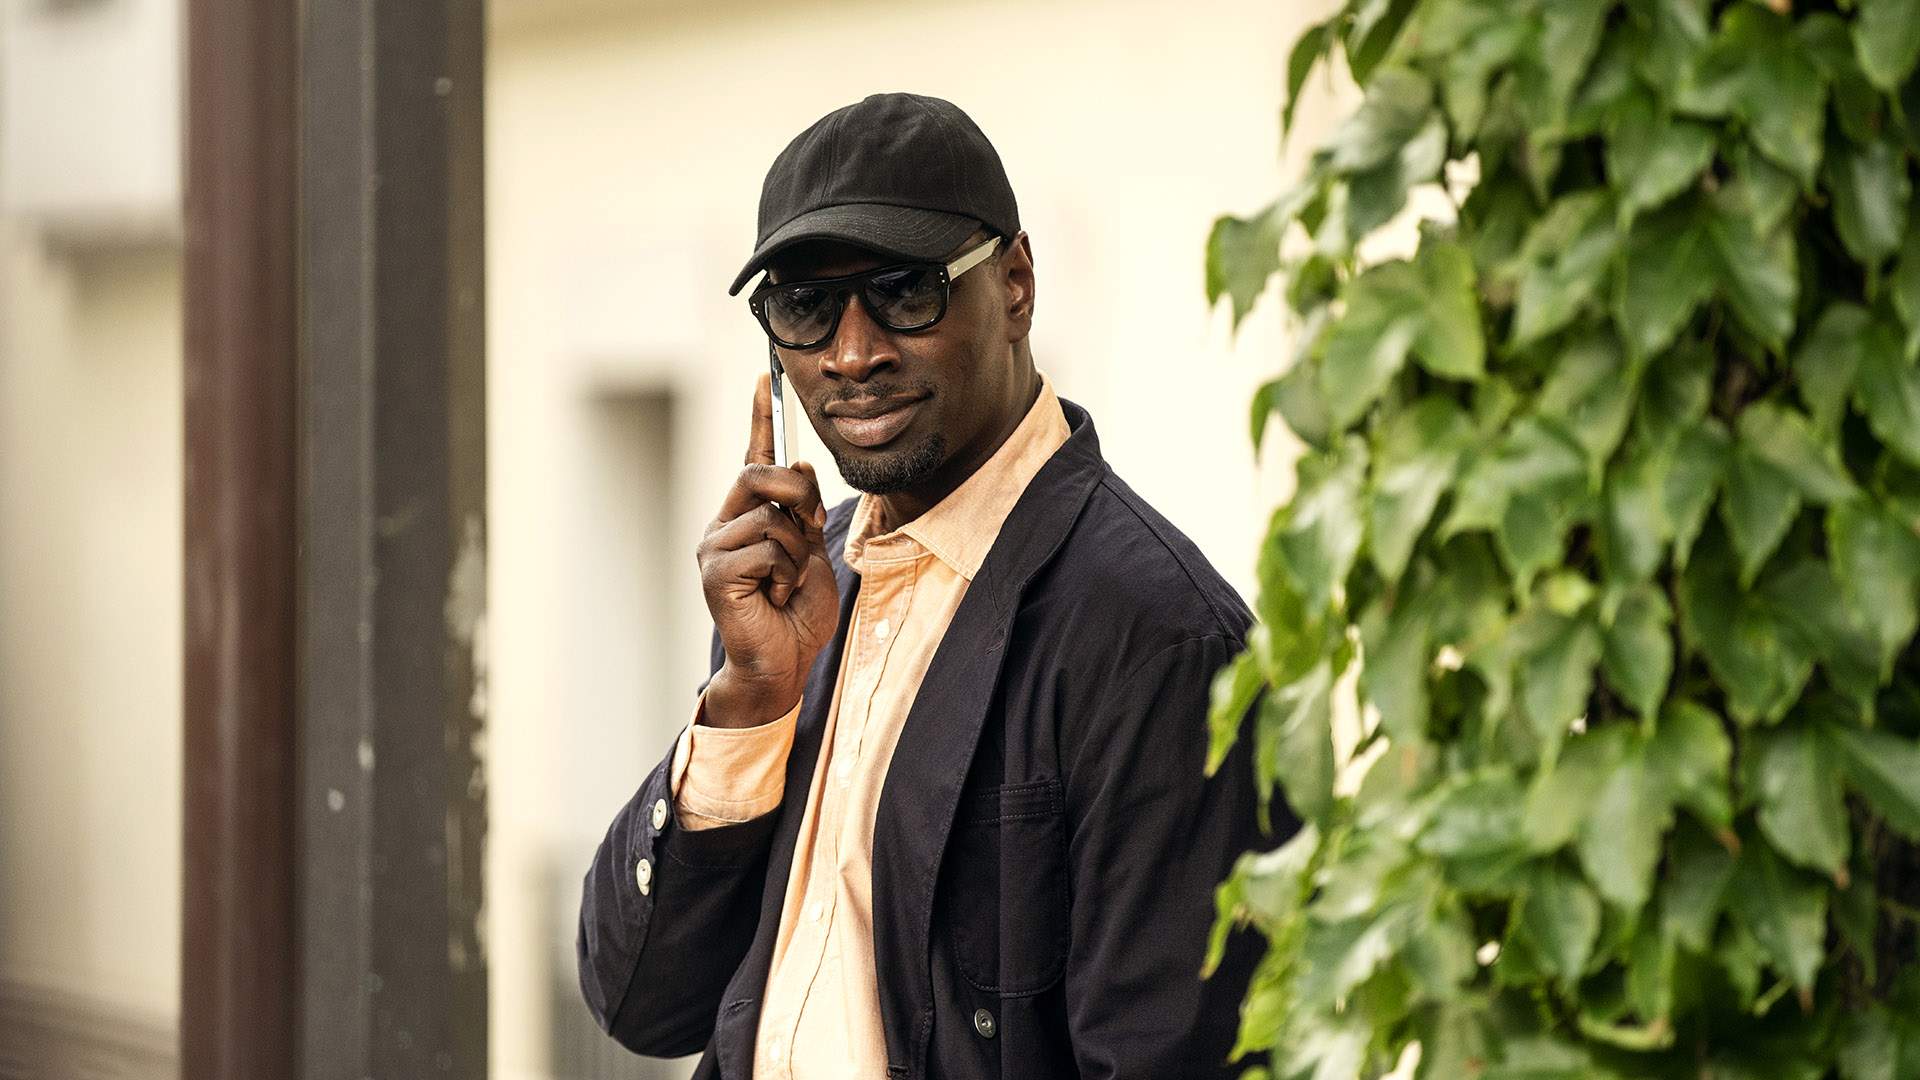 Crime Capers Don't Get Much More Charming Than Netflix's Suave Omar Sy-Starring Standout 'Lupin'